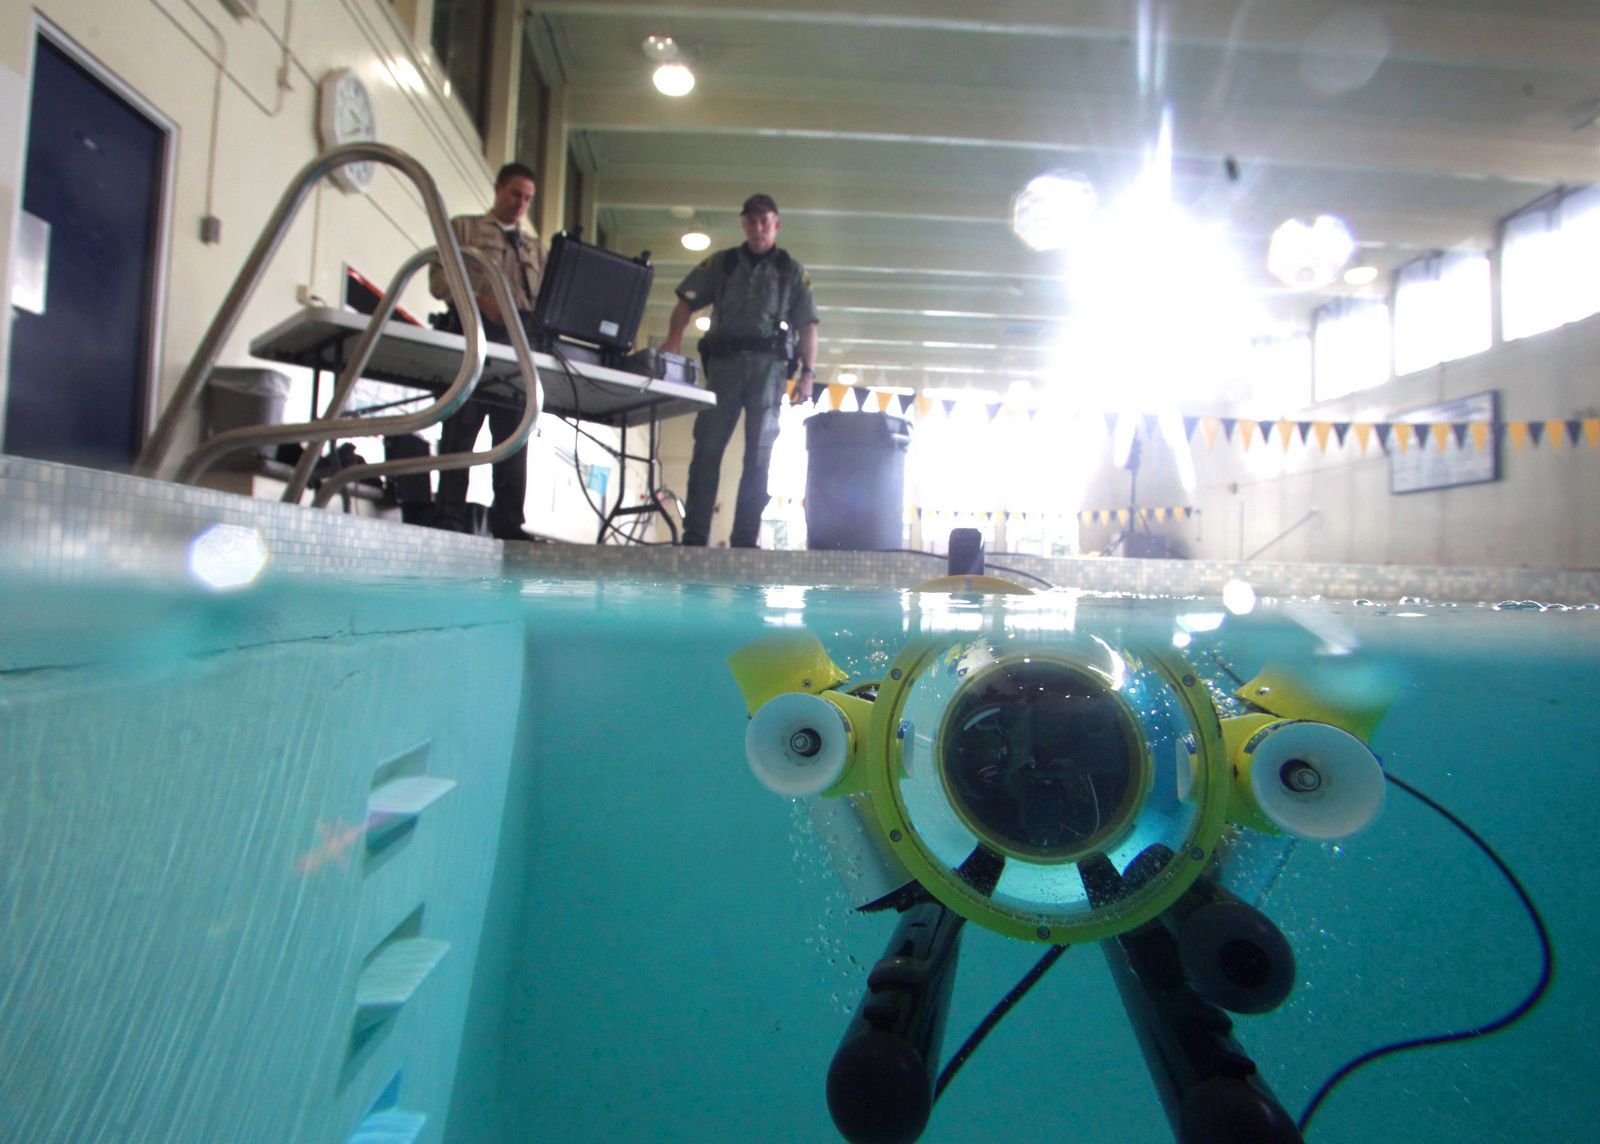 The Snohomish County Sheriff's Office's newly acquired SeaLion-2 underwater robot, dubbed "Batman" by deputies, cruises in a South Everett swimming pool last week. Its controllers are seen above the robot. Photo: Mark Mulligan / The Herald